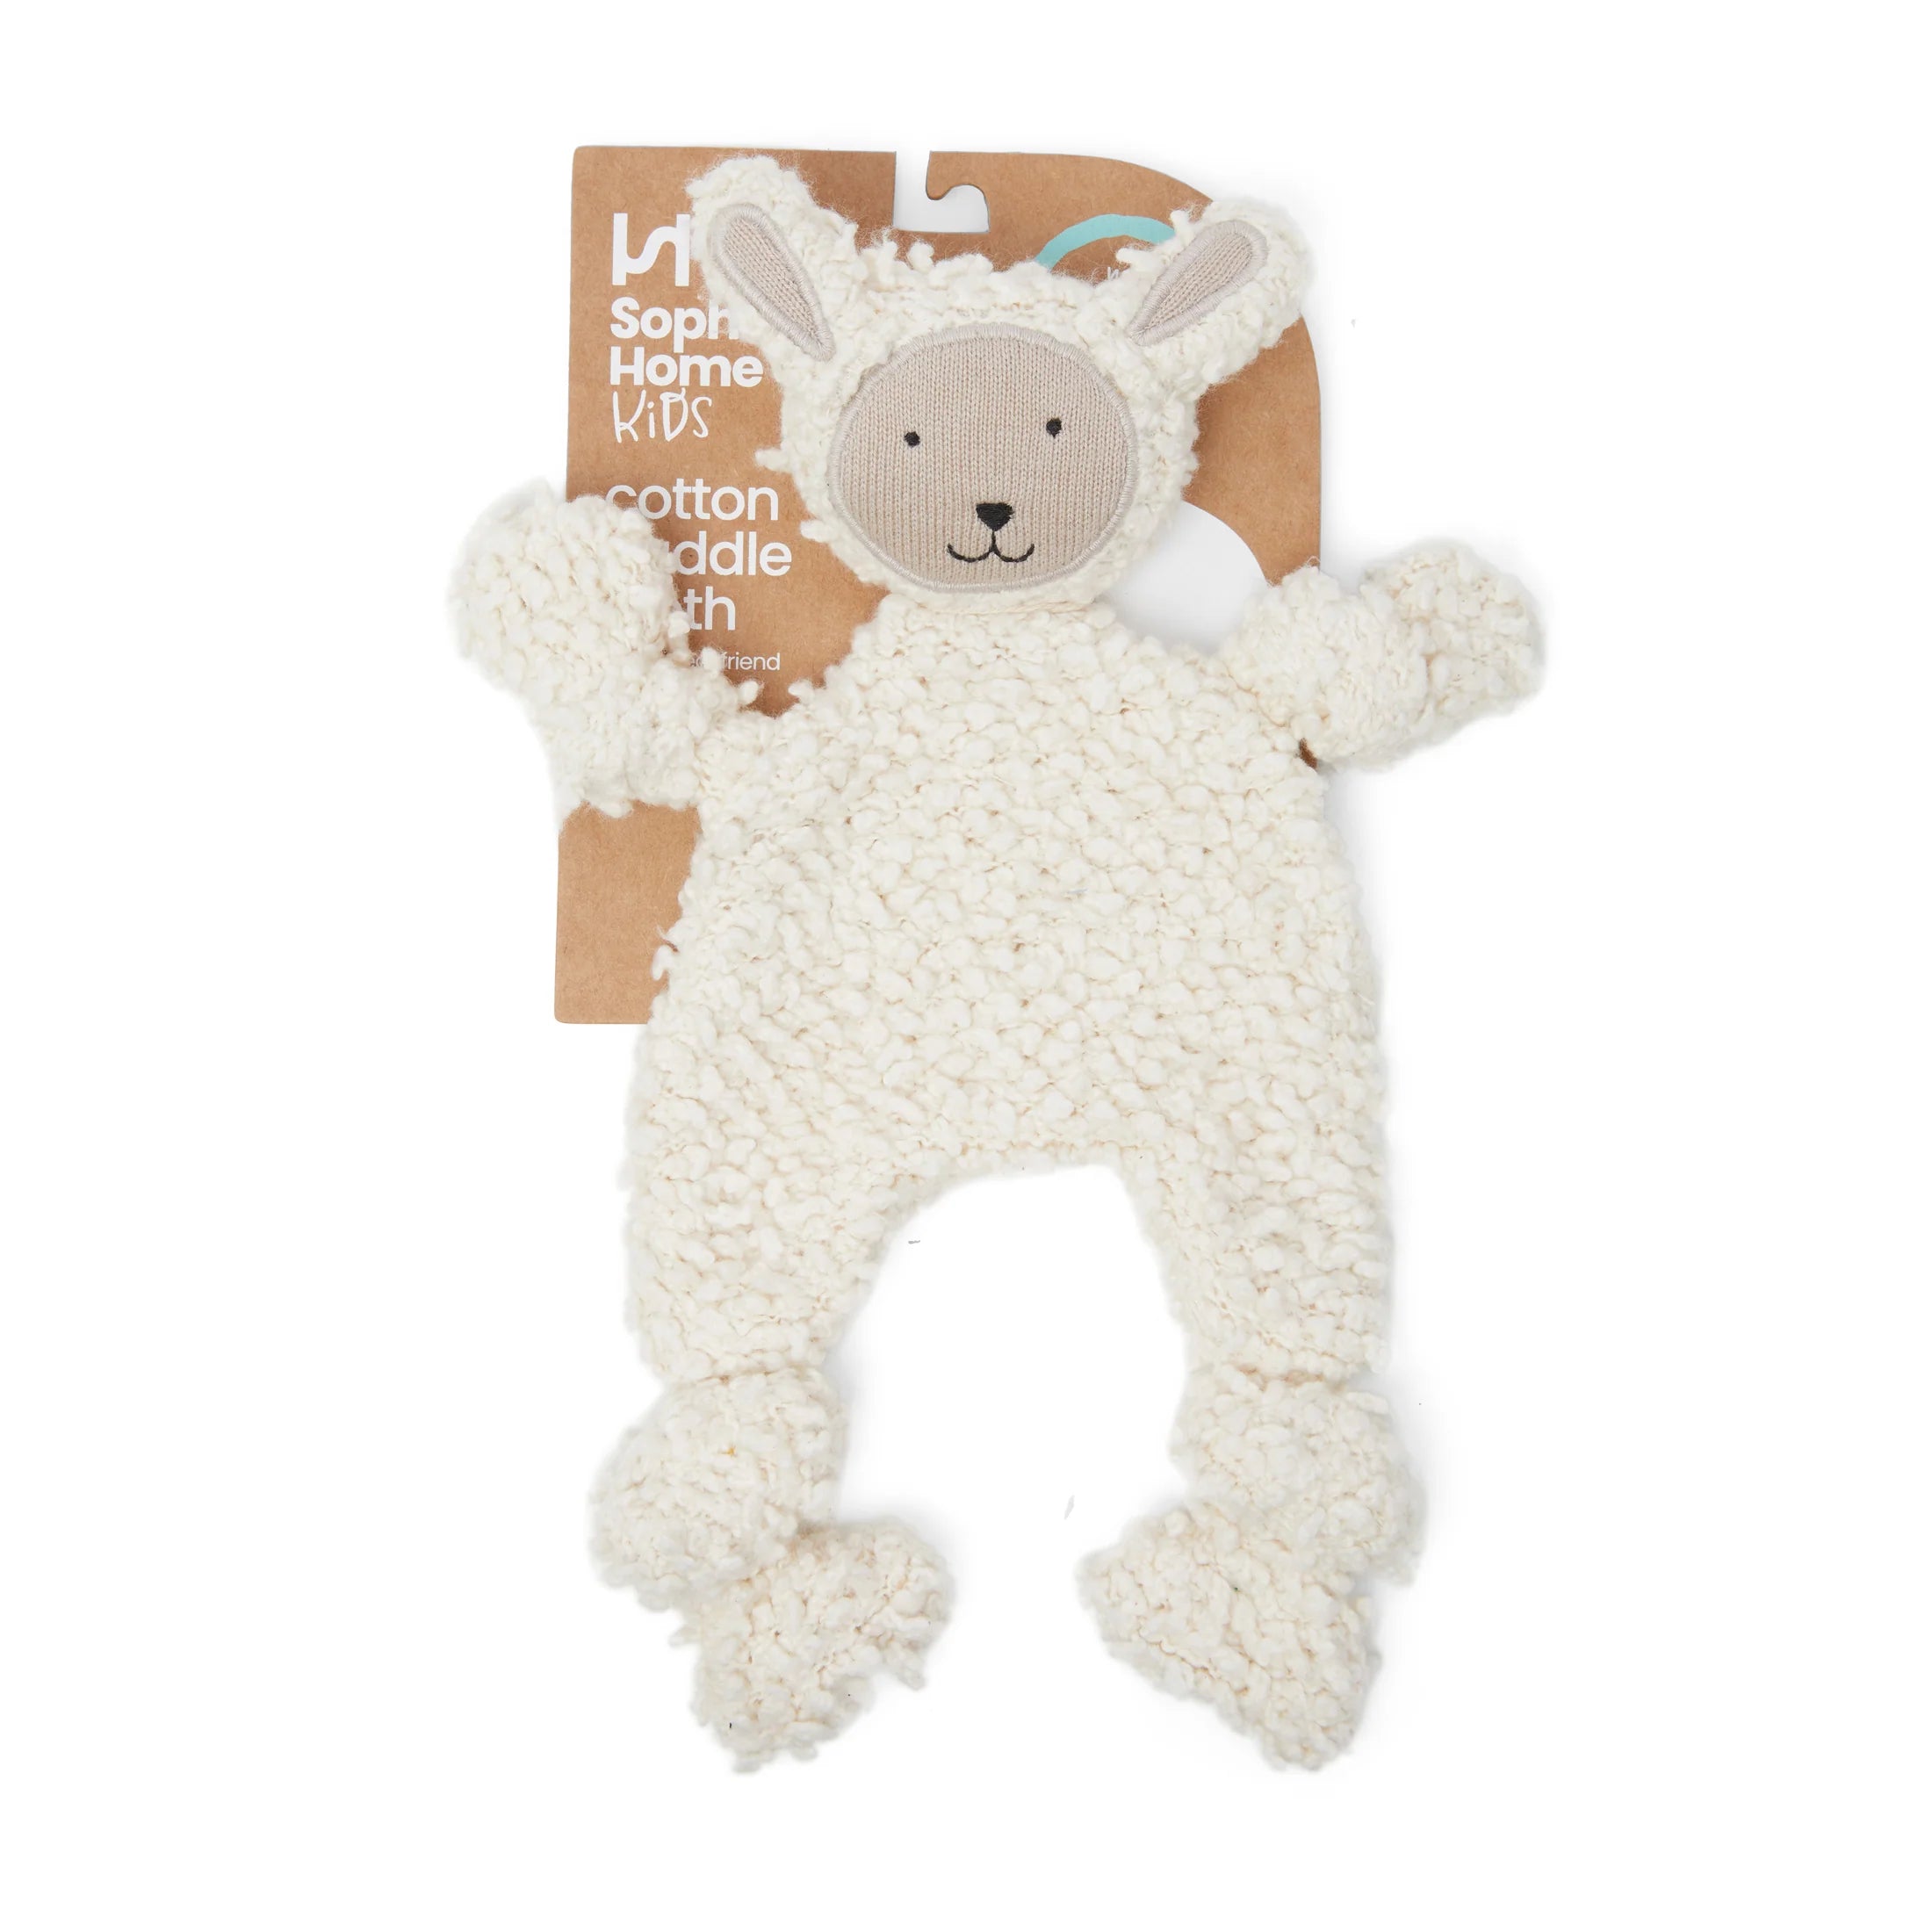 Wooly Sheep Comforter Cuddle Cloth | by Sophie Home